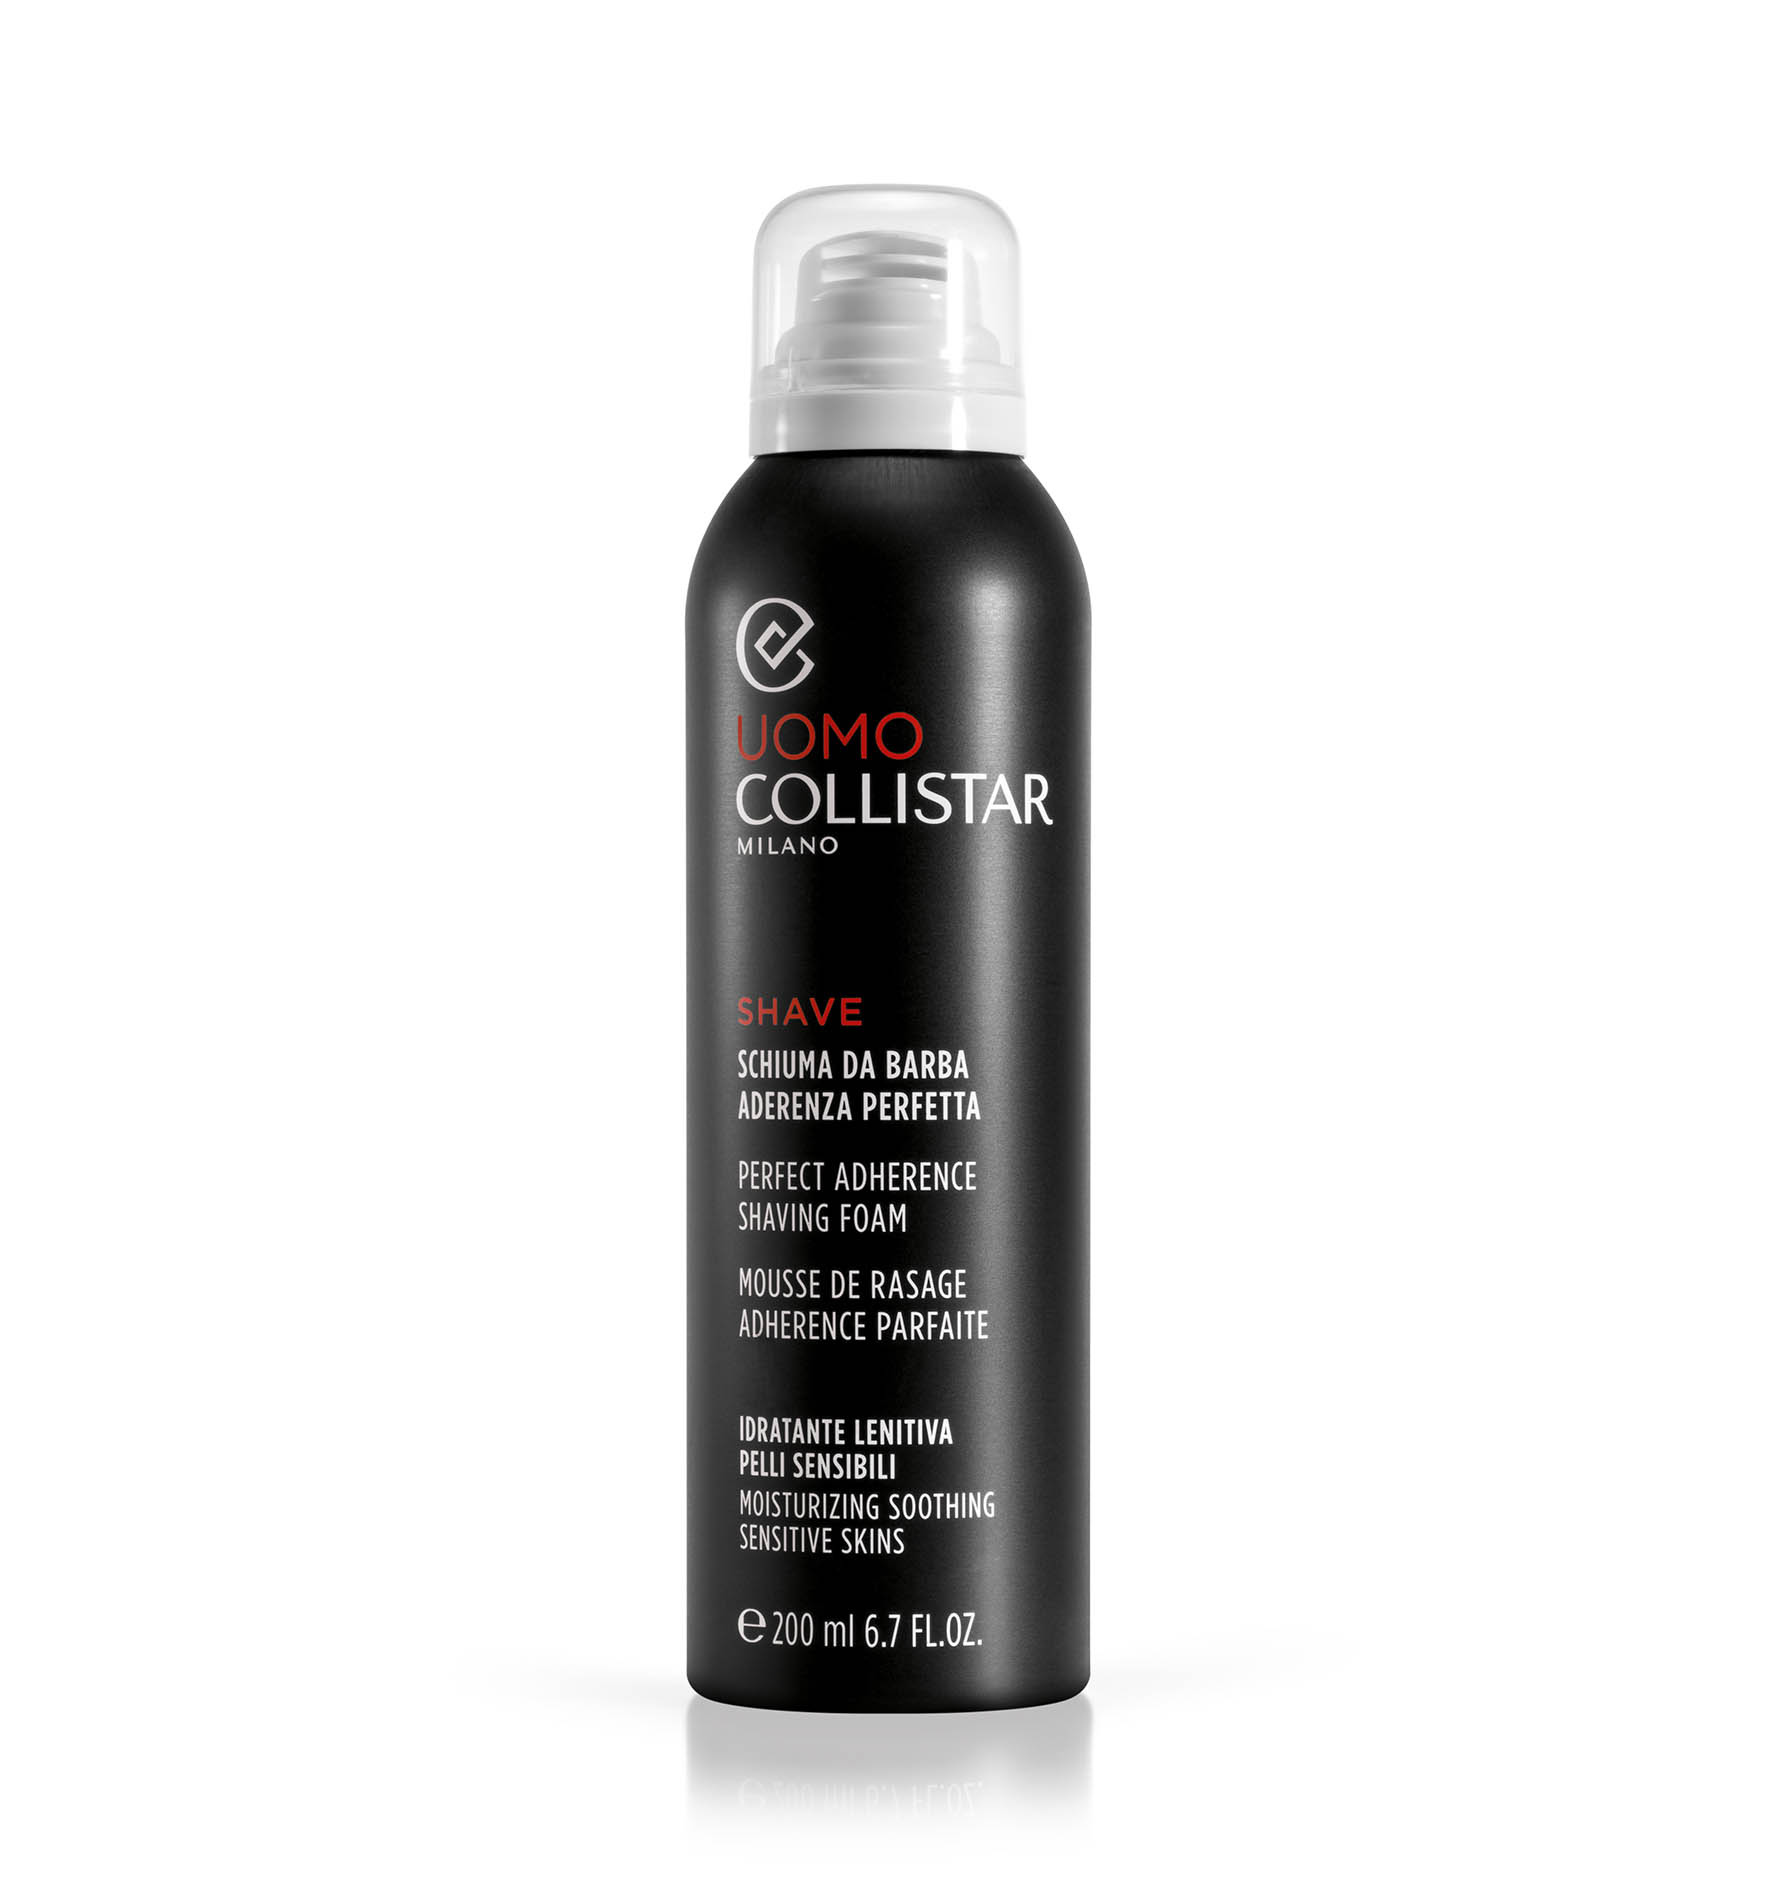 MOUSSE A RASER PARFAITE ADHERENCE - bestsellers | Collistar - Shop Online Ufficiale